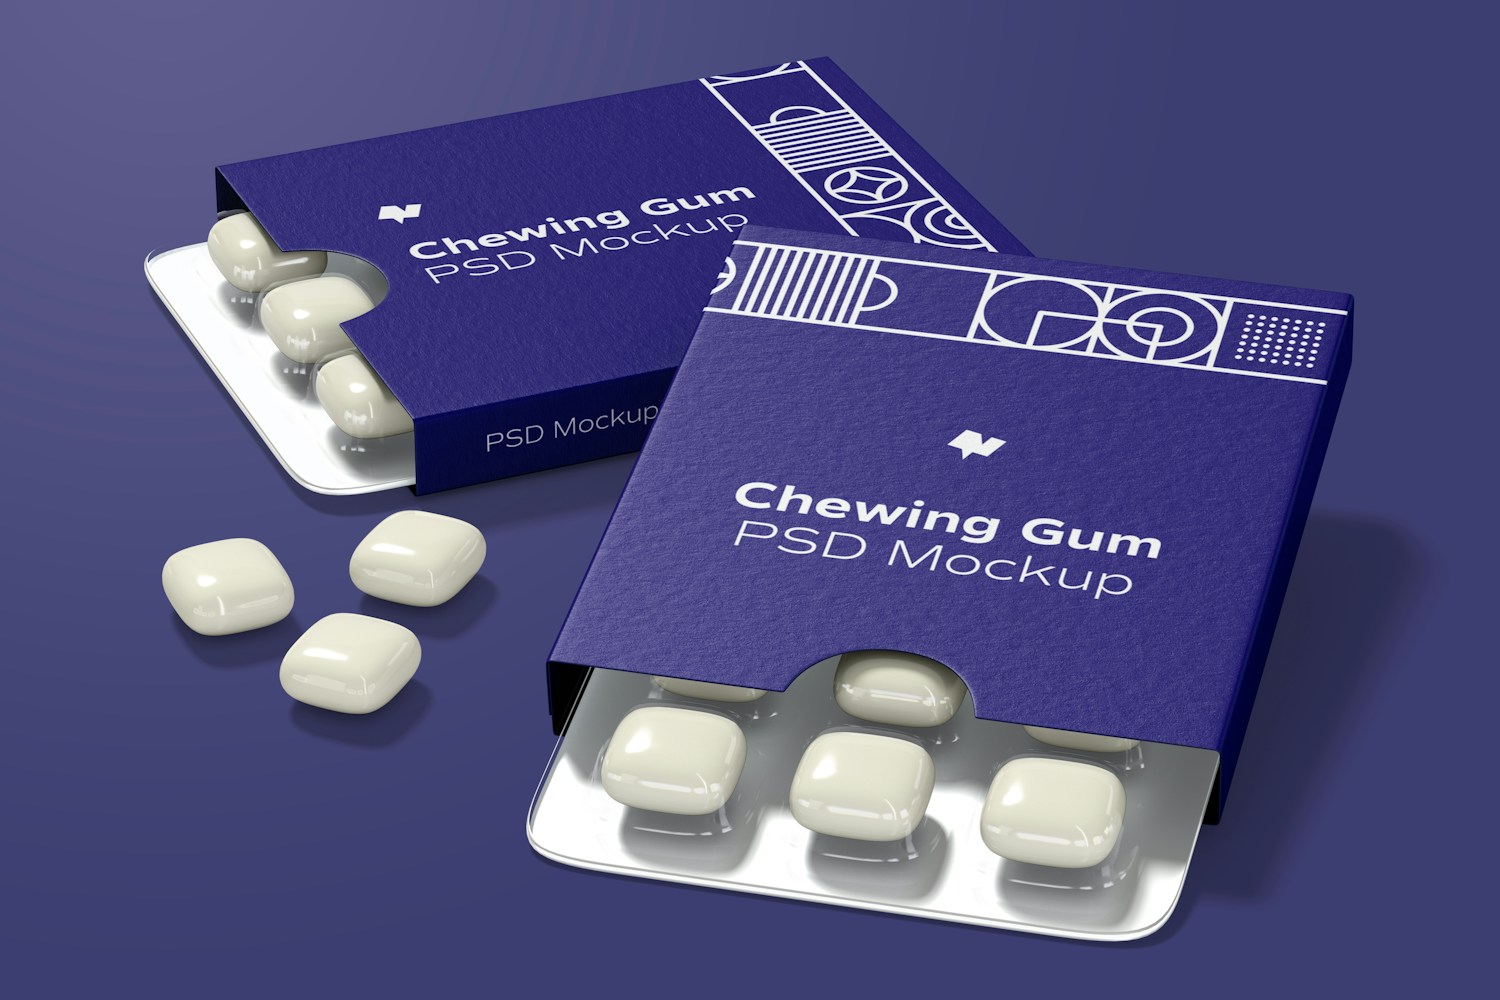 You sure are craving chewing gum. Traditional mint flavor!